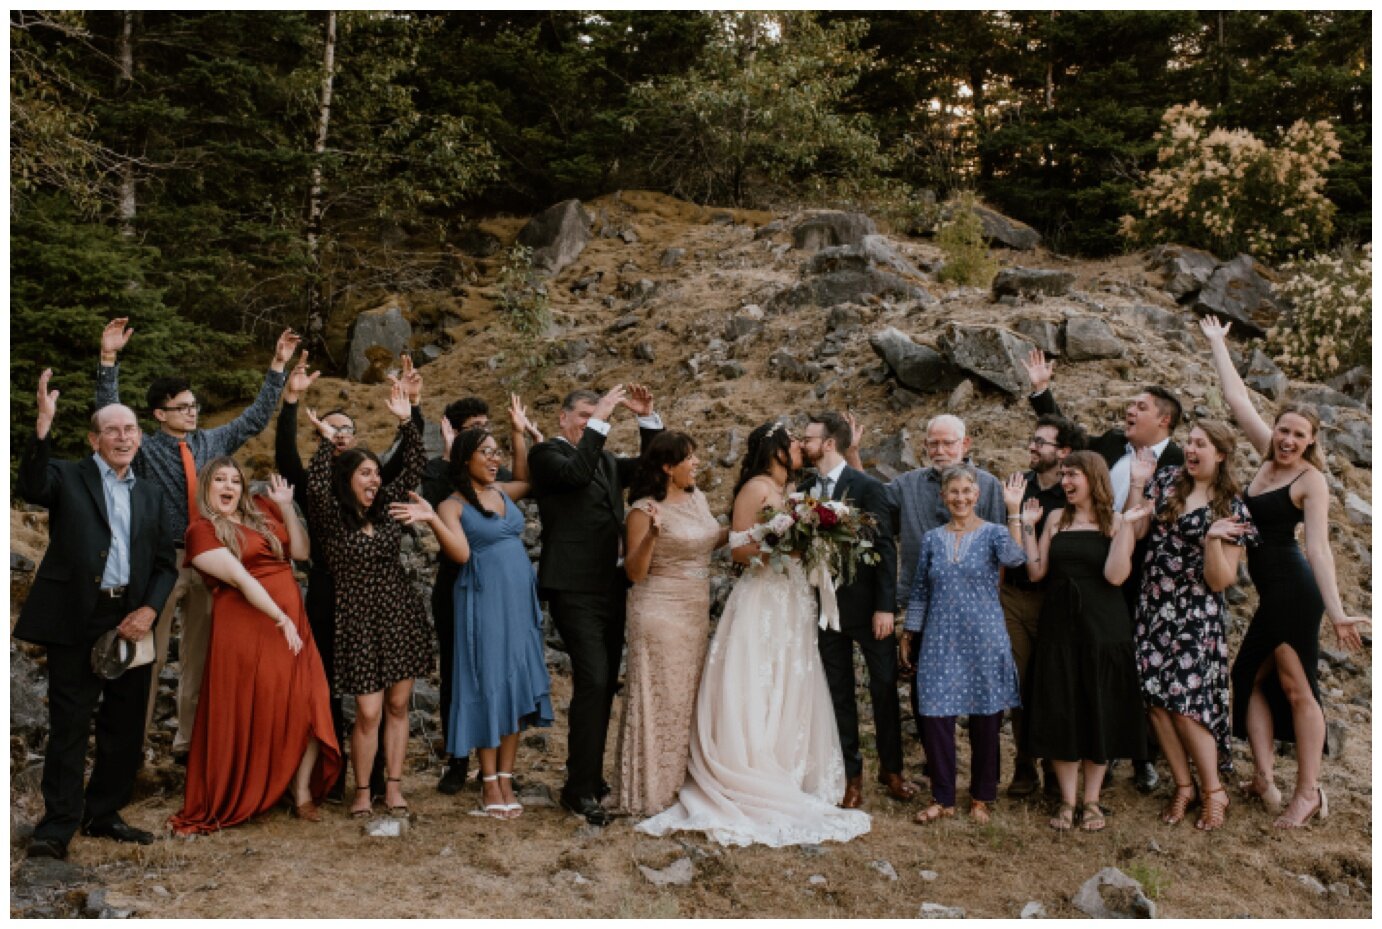 Elopement at Government Cove Peninsula - Madeline Rose Photography - PNW Elopement Photographer_0019.jpg